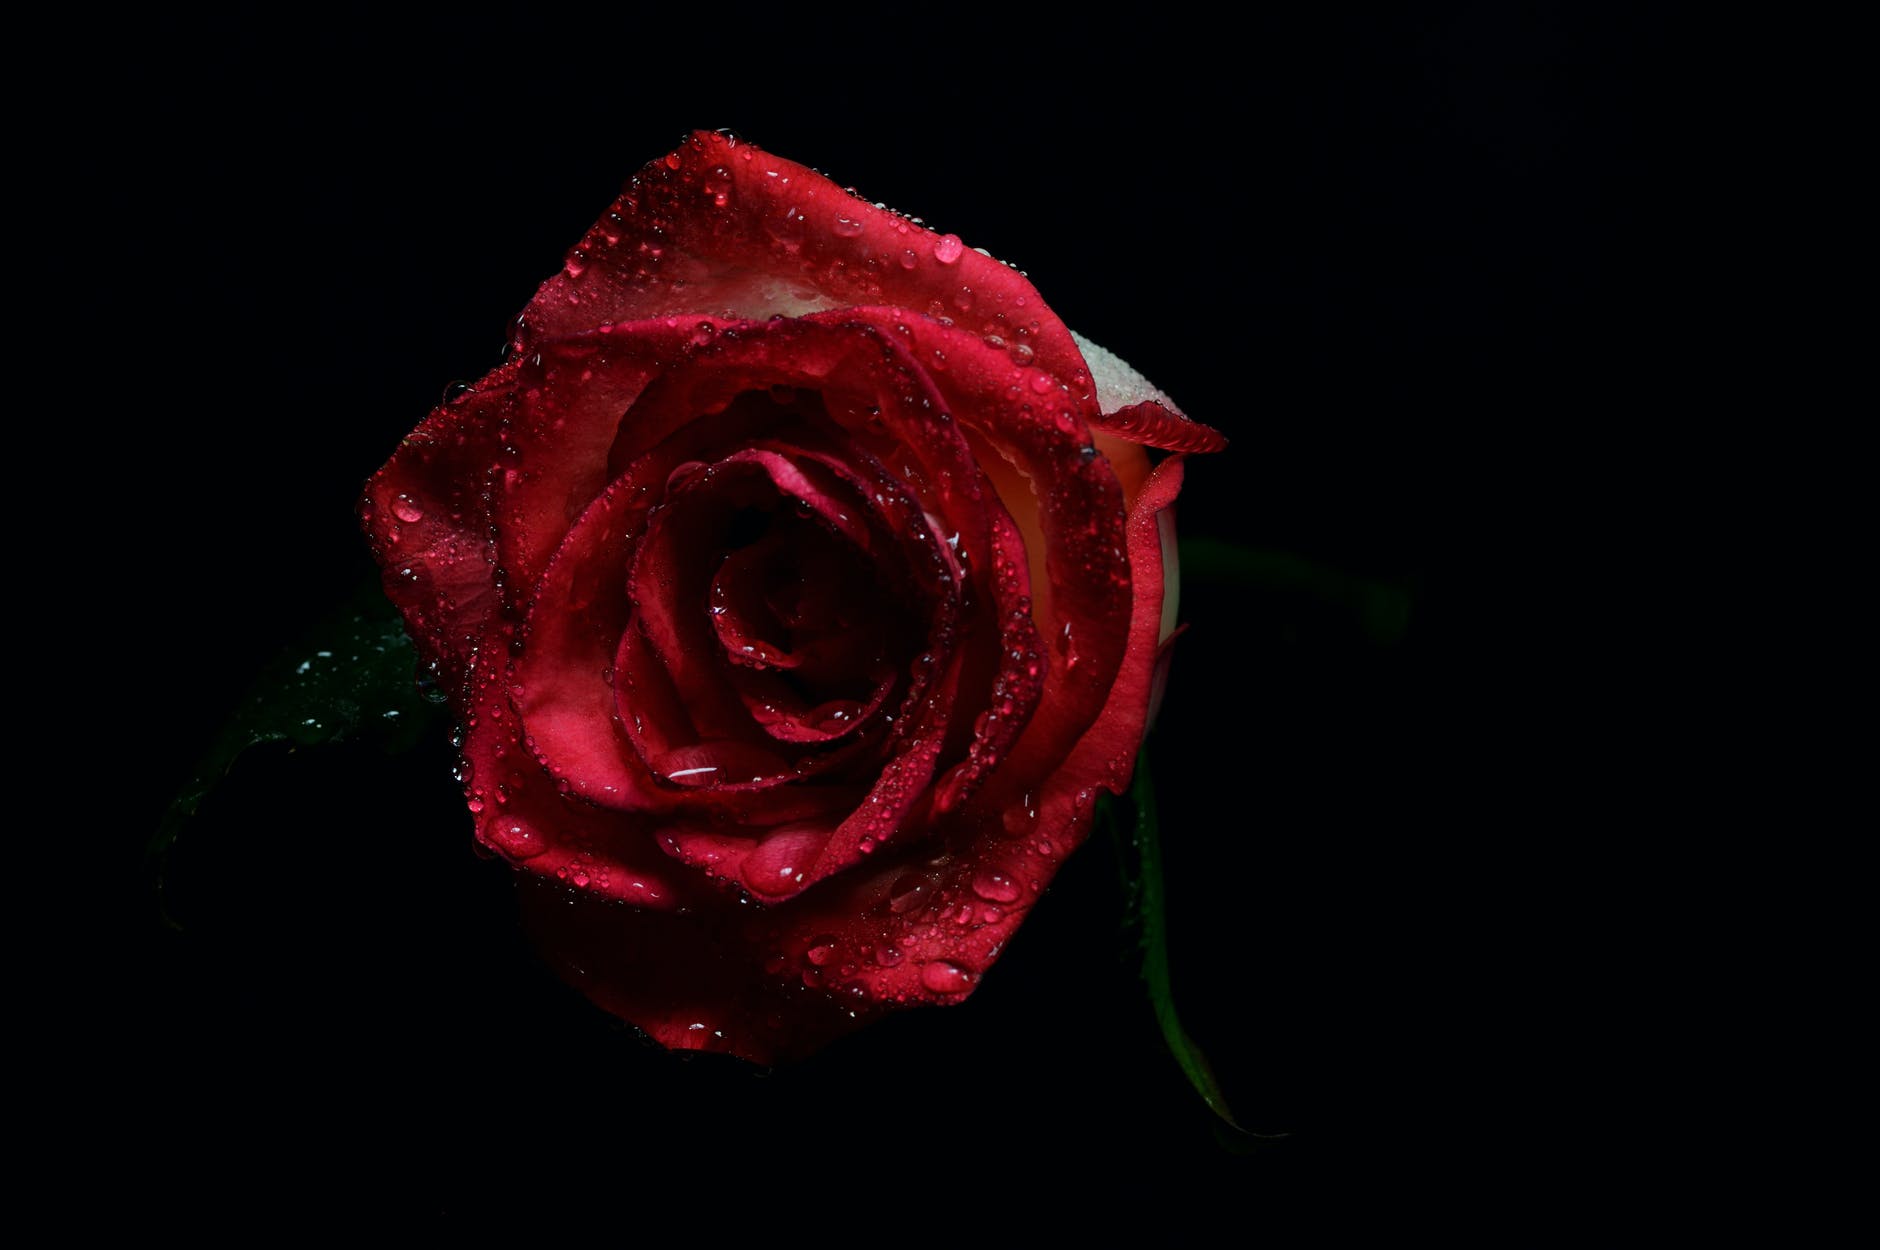 Rose dripping with water with a black background